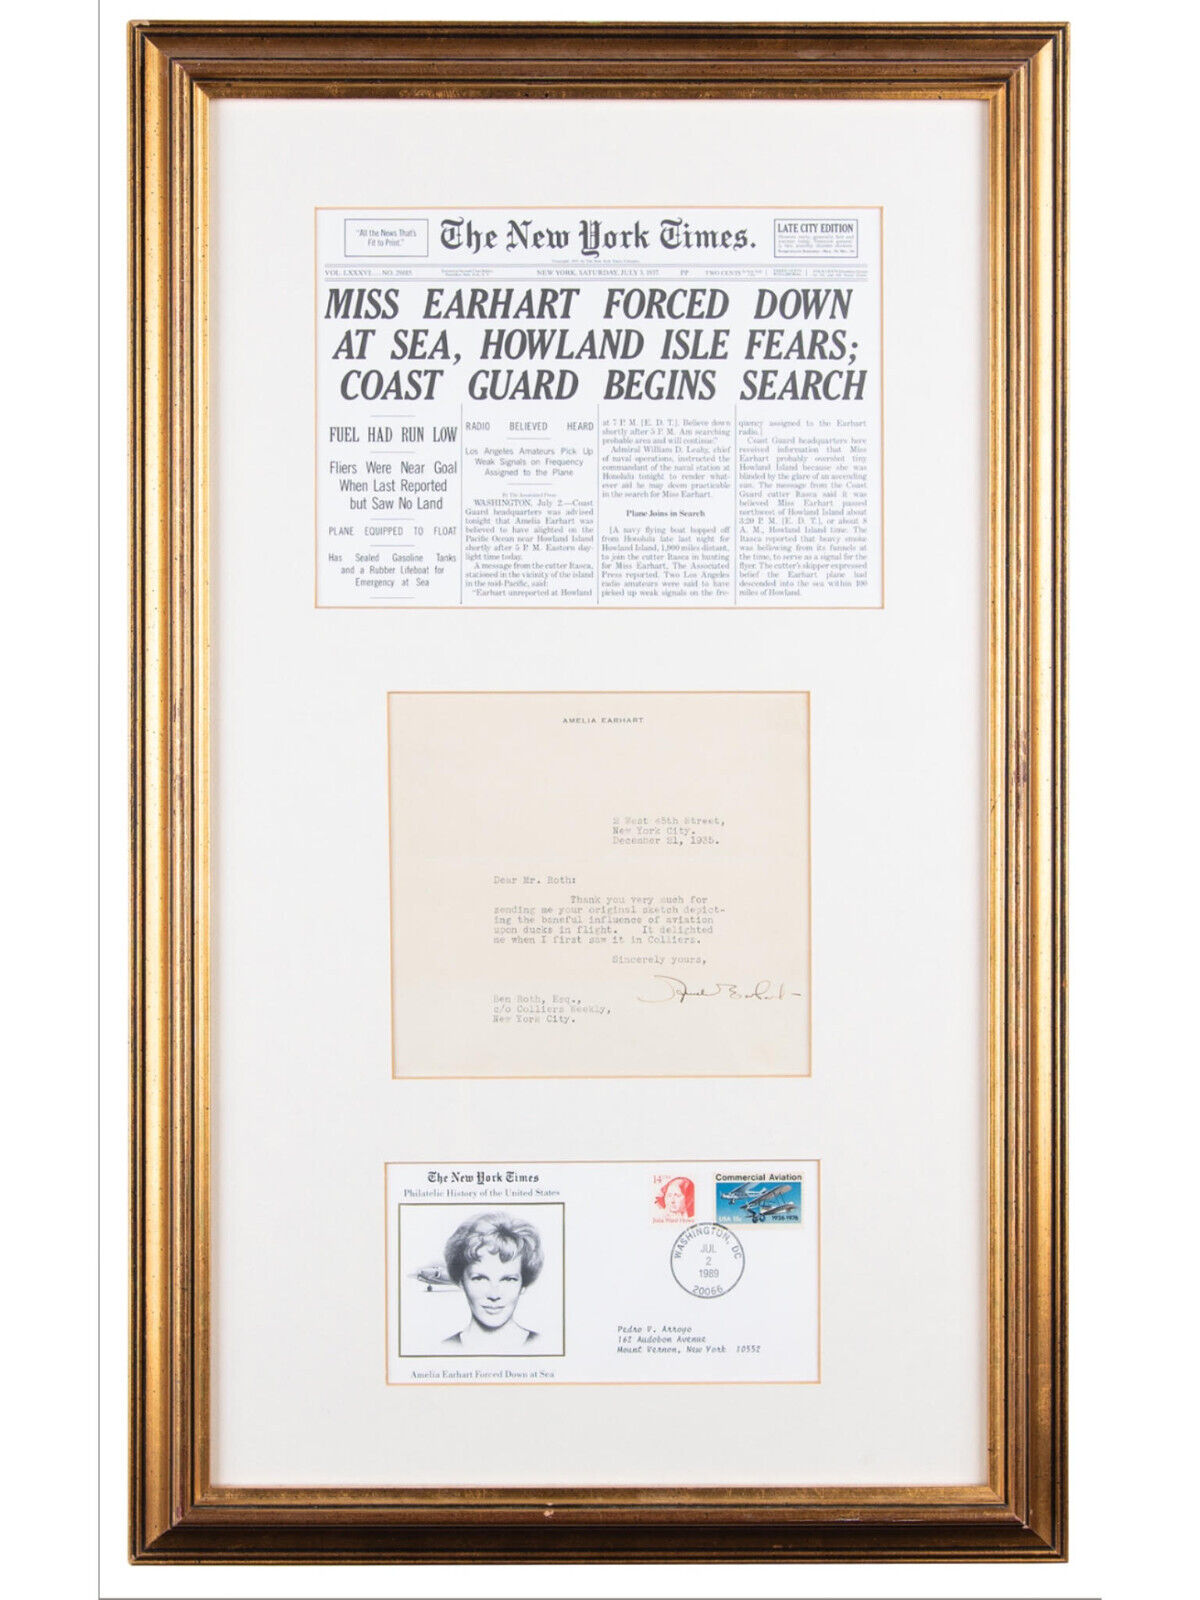 Amelia Earhart 1935 Typed Letter Signed - Pilot - Presented Nicely Framed